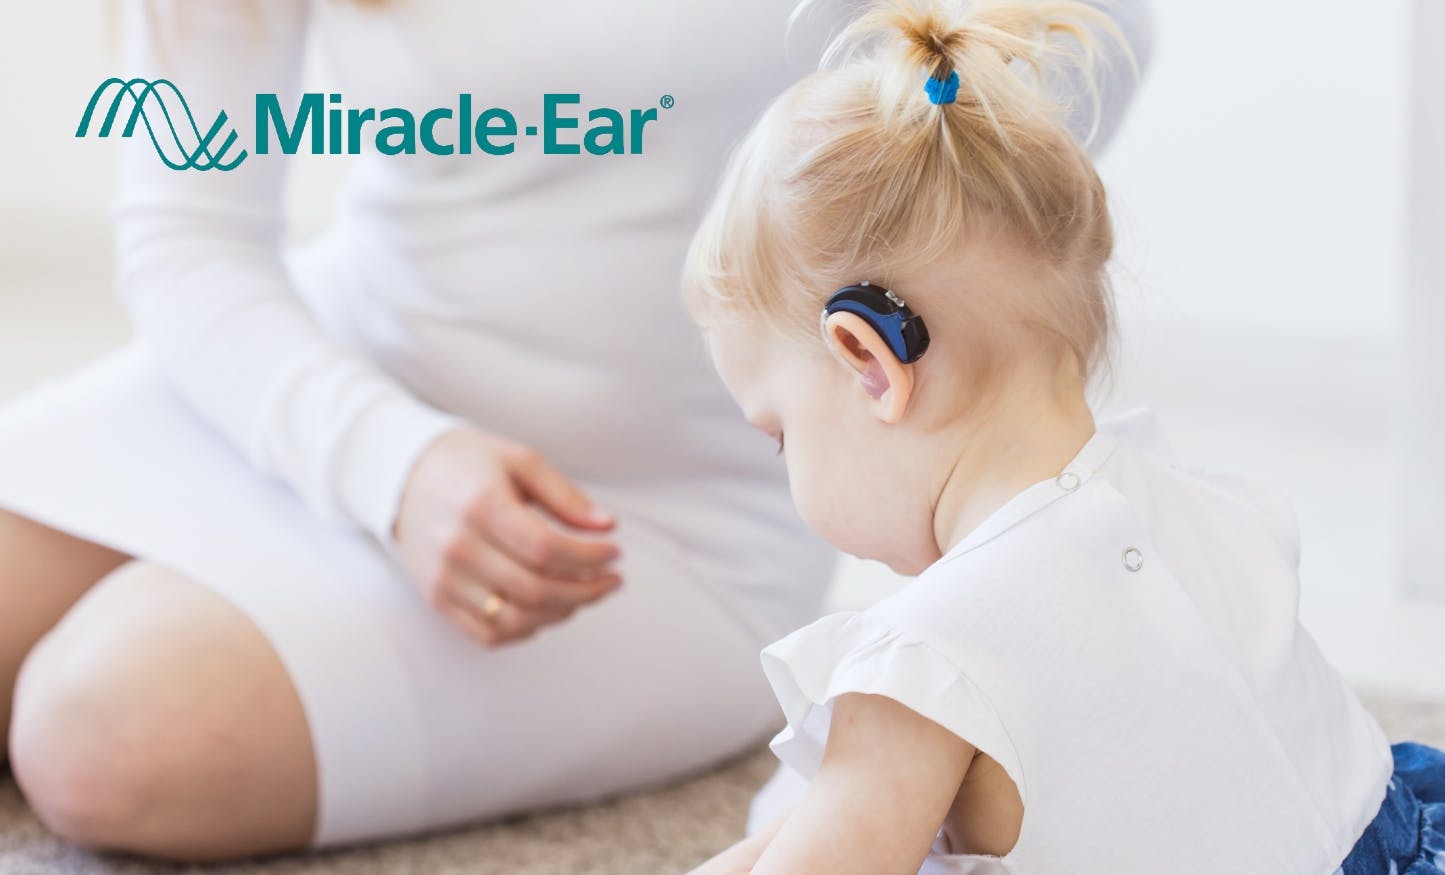 Miracle-Ear Review: More Than Just a Hearing Aid